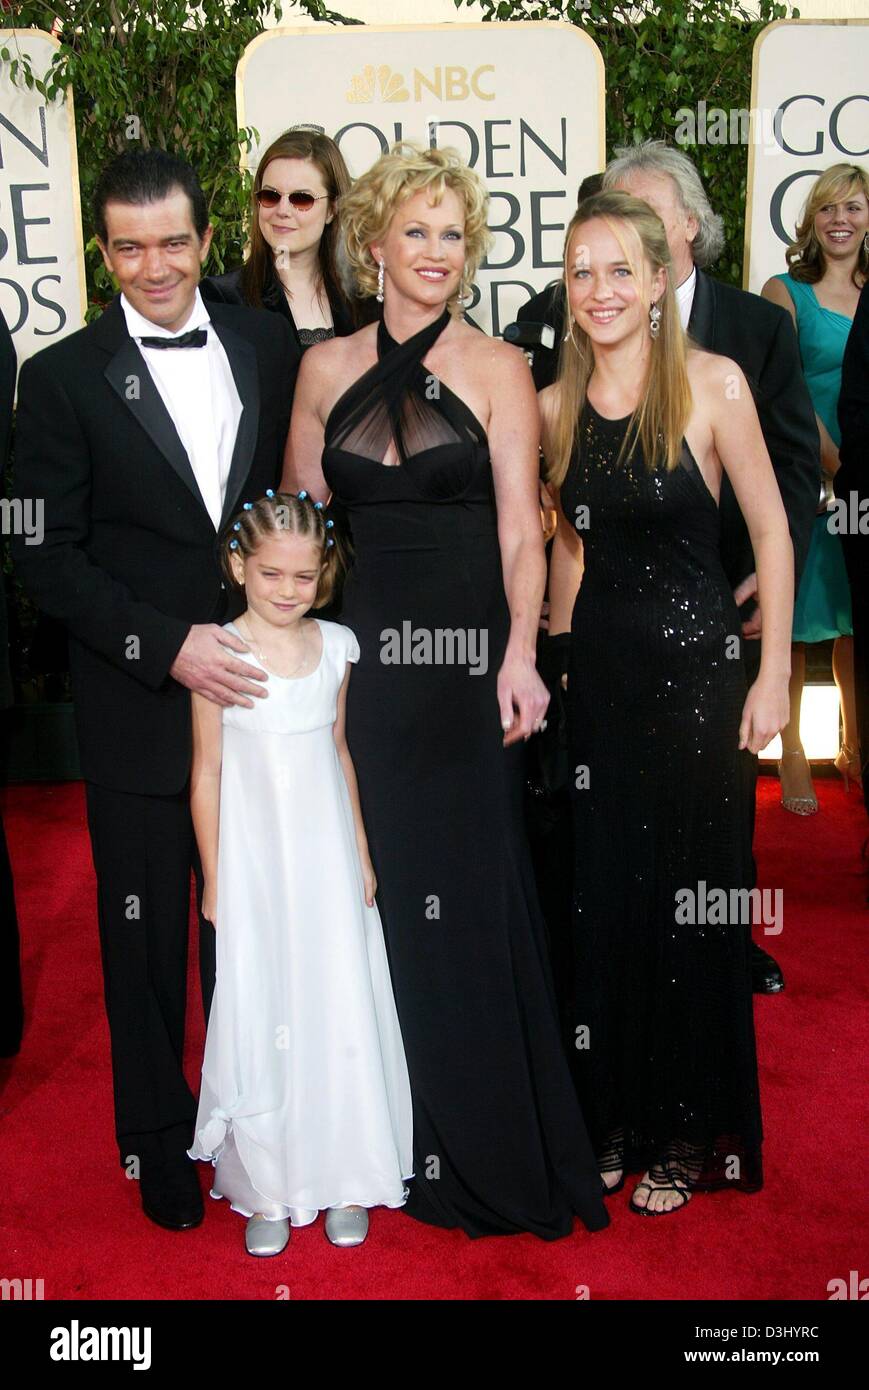 (dpa) - Spanish born actor Antonio Banderas  and his wife US actress Melanie Griffith pose with their daughters Dakota (R) and Stella on the red carpet on her arrival at the Golden Globe Awards in Beverly Hills, USA, 25 January 2004. Stock Photo